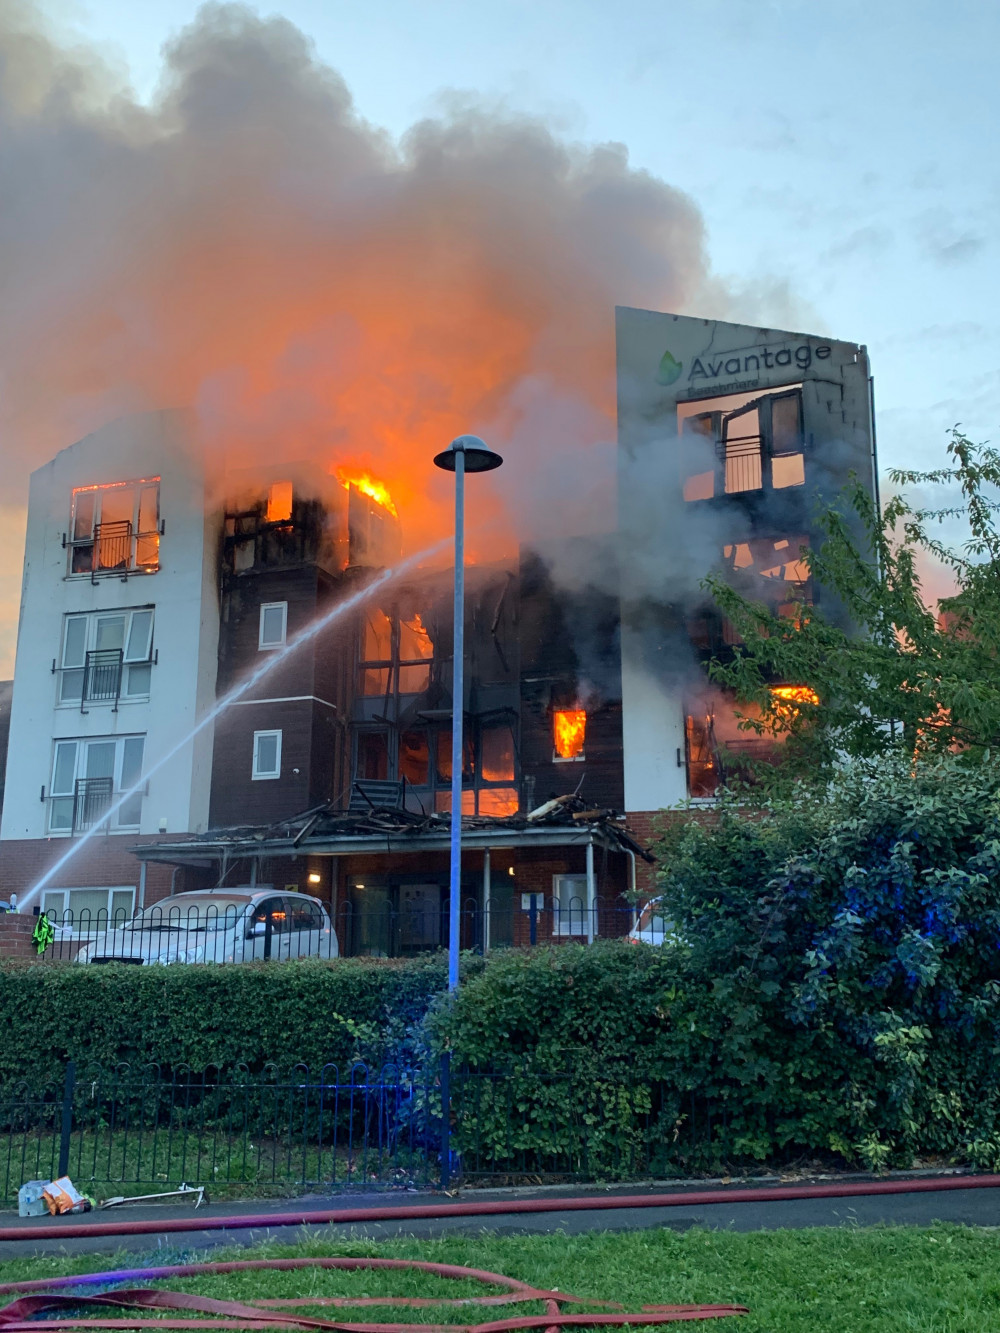 The fire at the Beechmere Residential Complex, Rolls Avenue, in August 2019 (Cheshire Fire & Rescue Service).